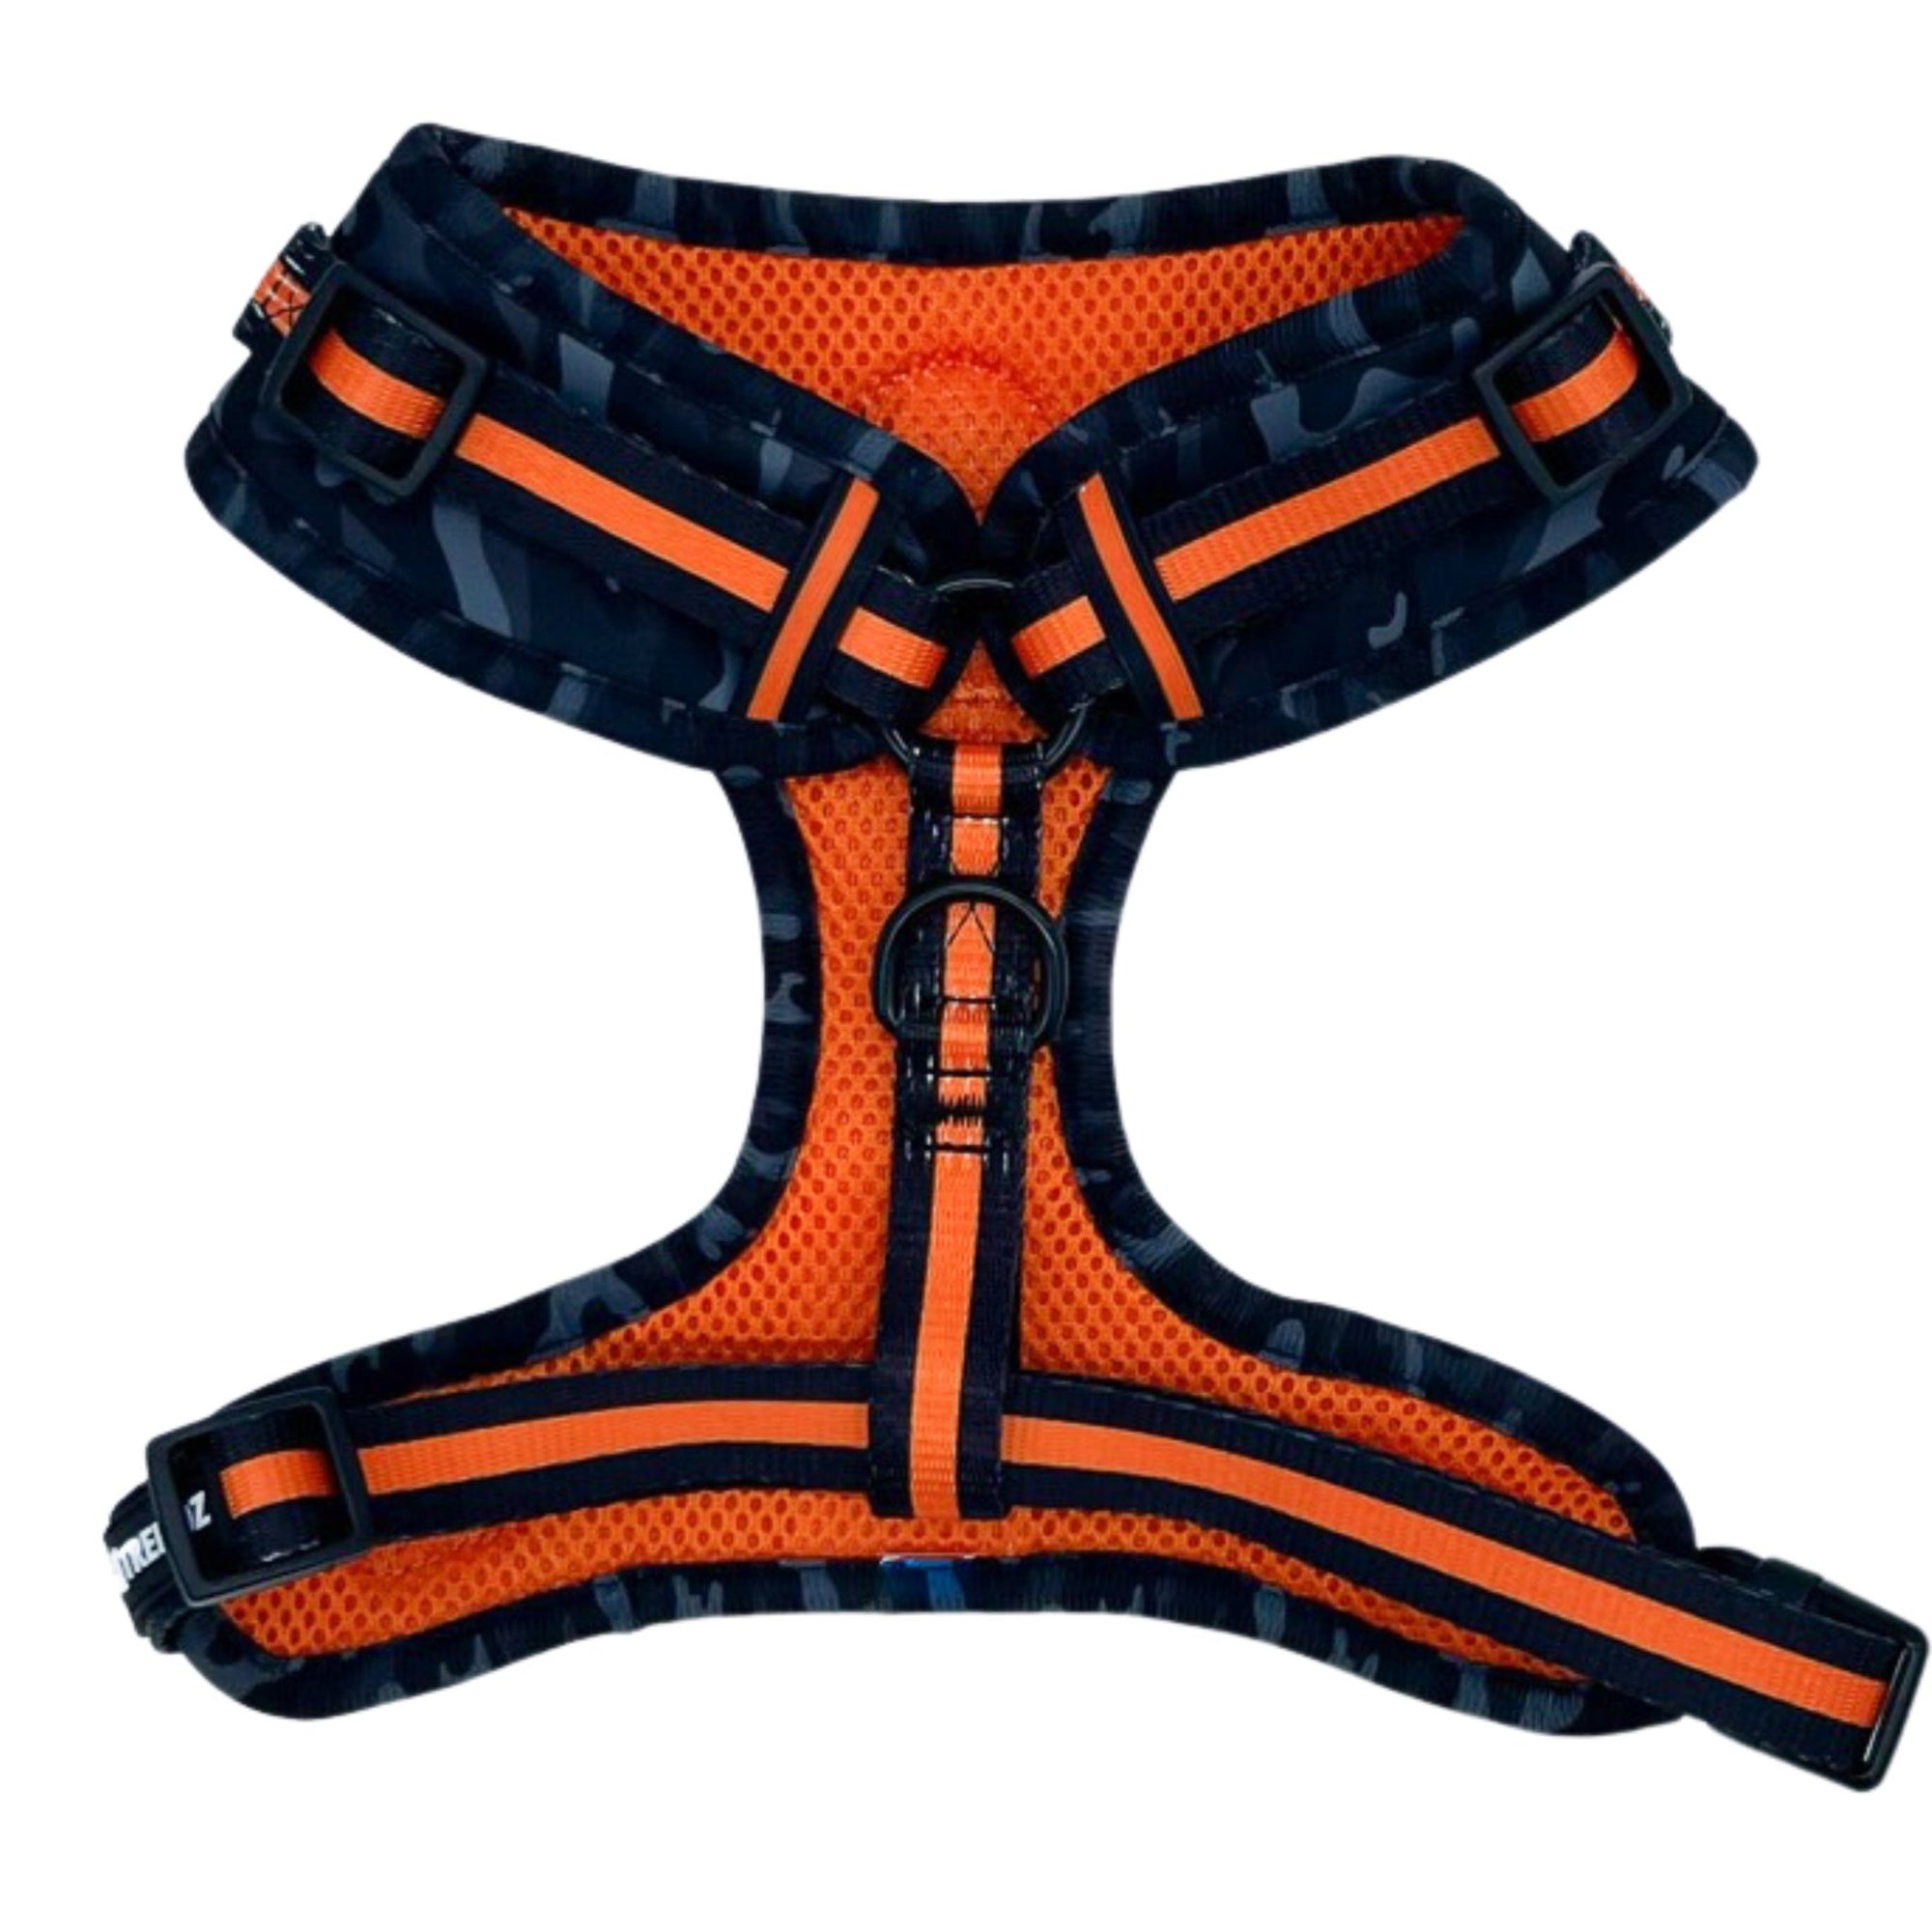 No Pull Dog Harness - black and gray camo with orange accents on dog adjustable harness - back side view against a white background - Wag Trendz